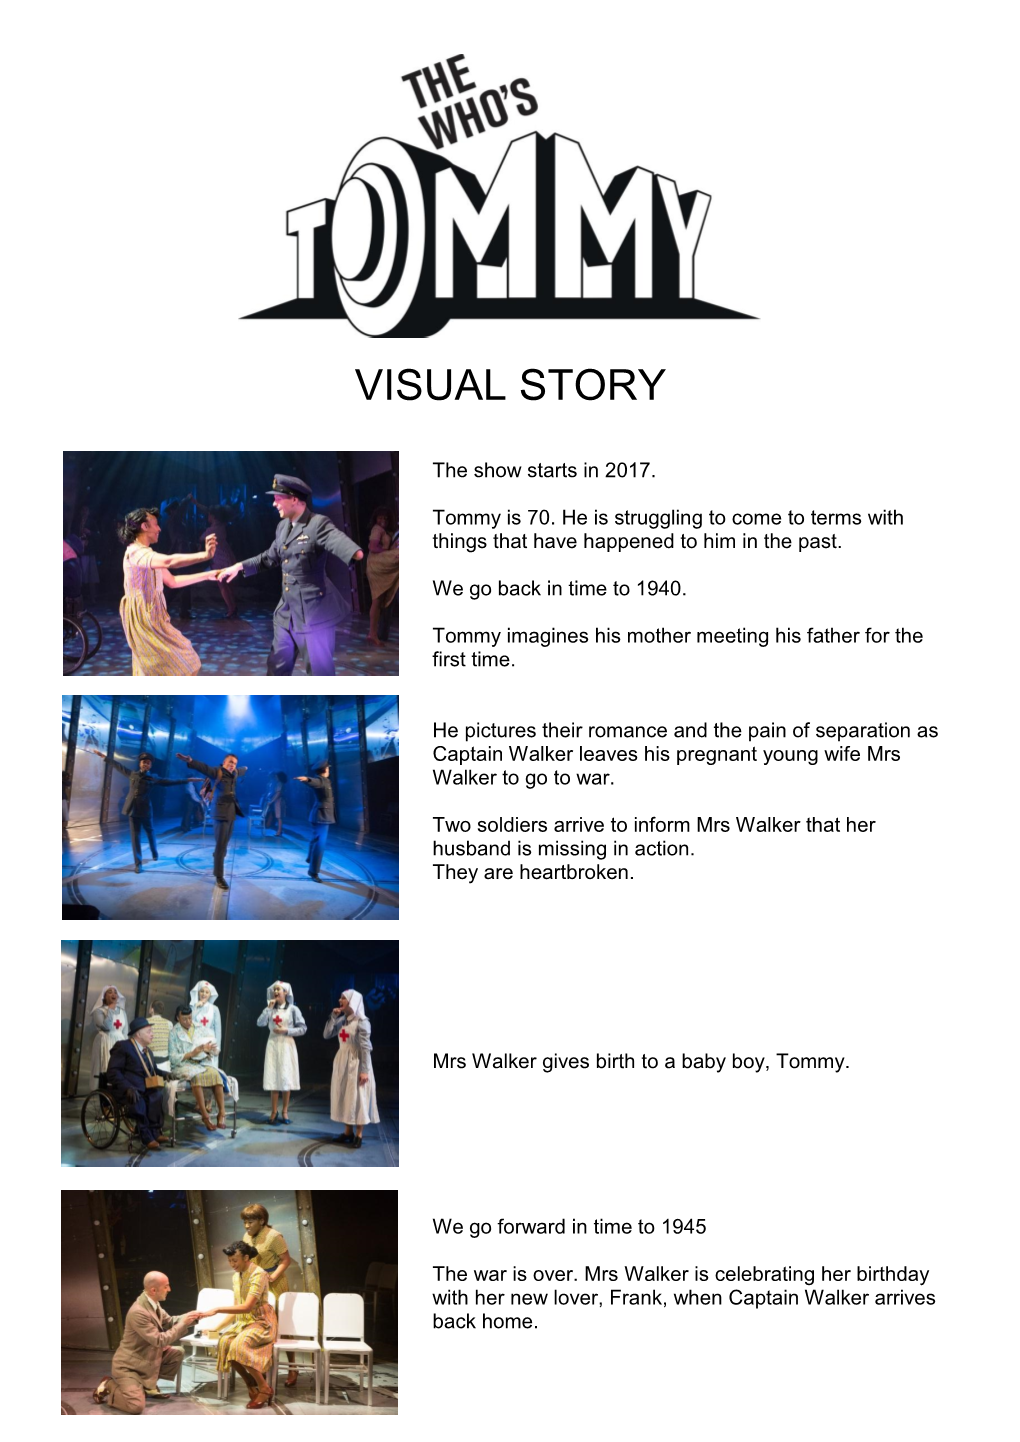 Please Click Here to Download a Free Copy of the Tommy Visual Story